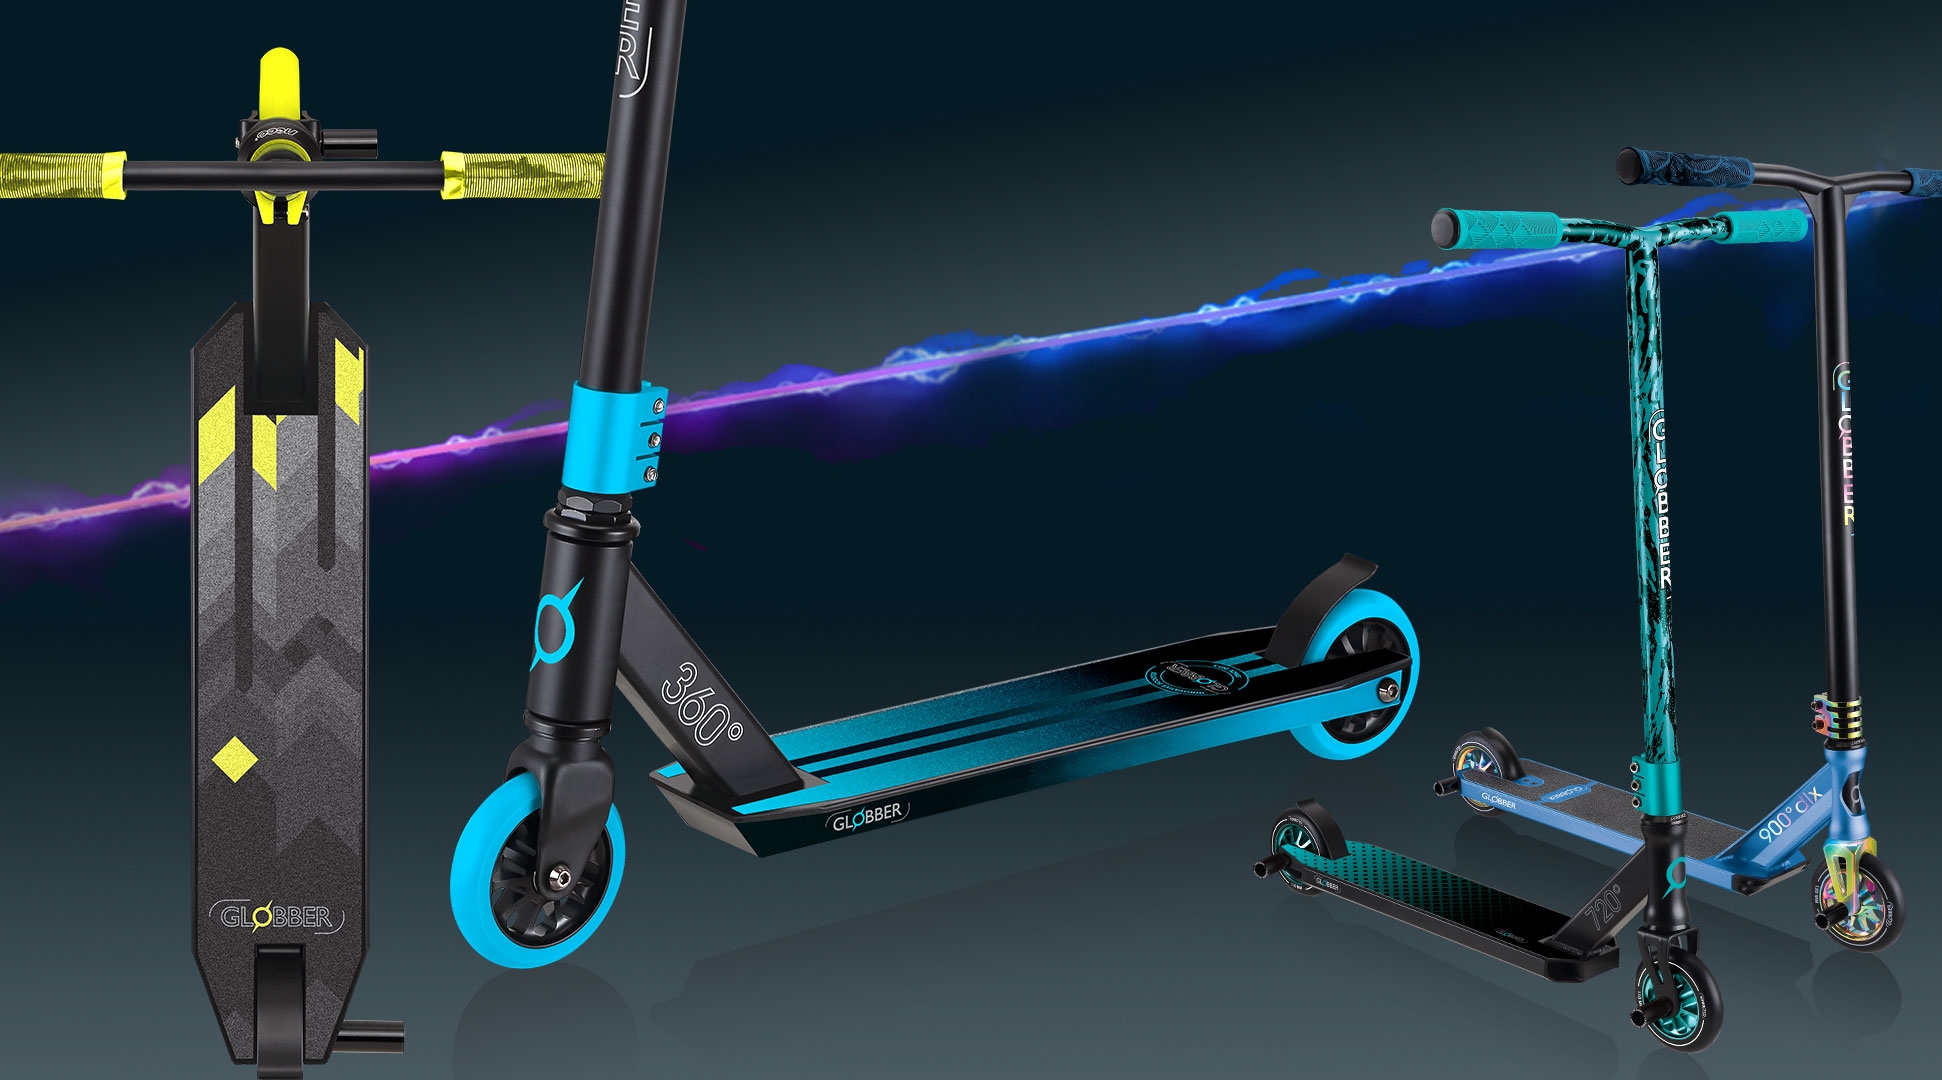 GS cool trick scooters have undergone a revamp with slick new look!